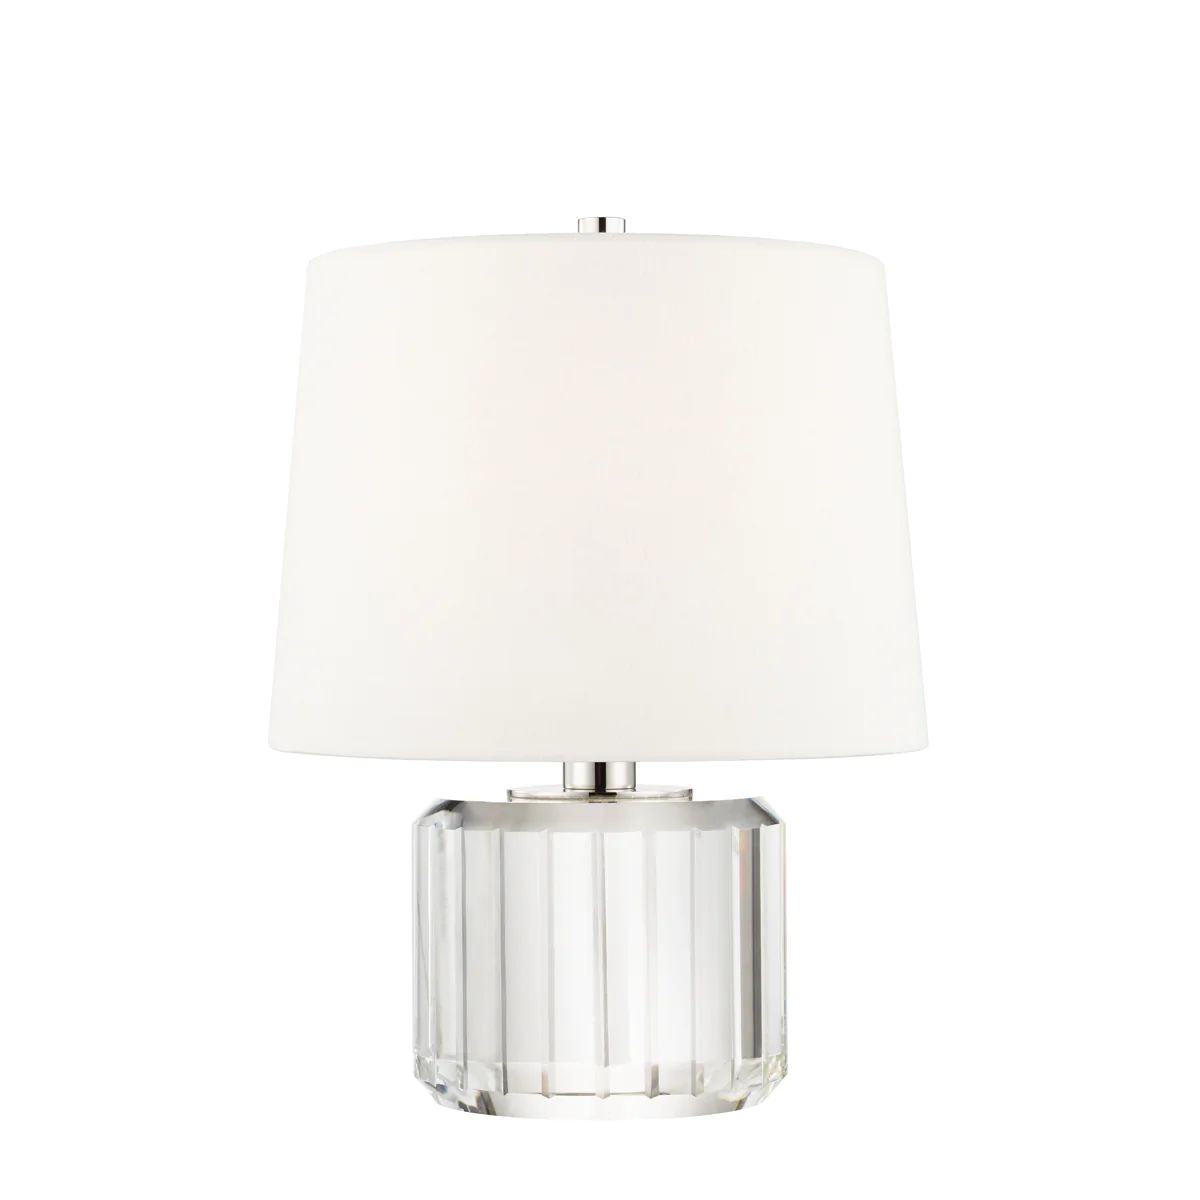 Hague Table Lamp | Tuesday Made